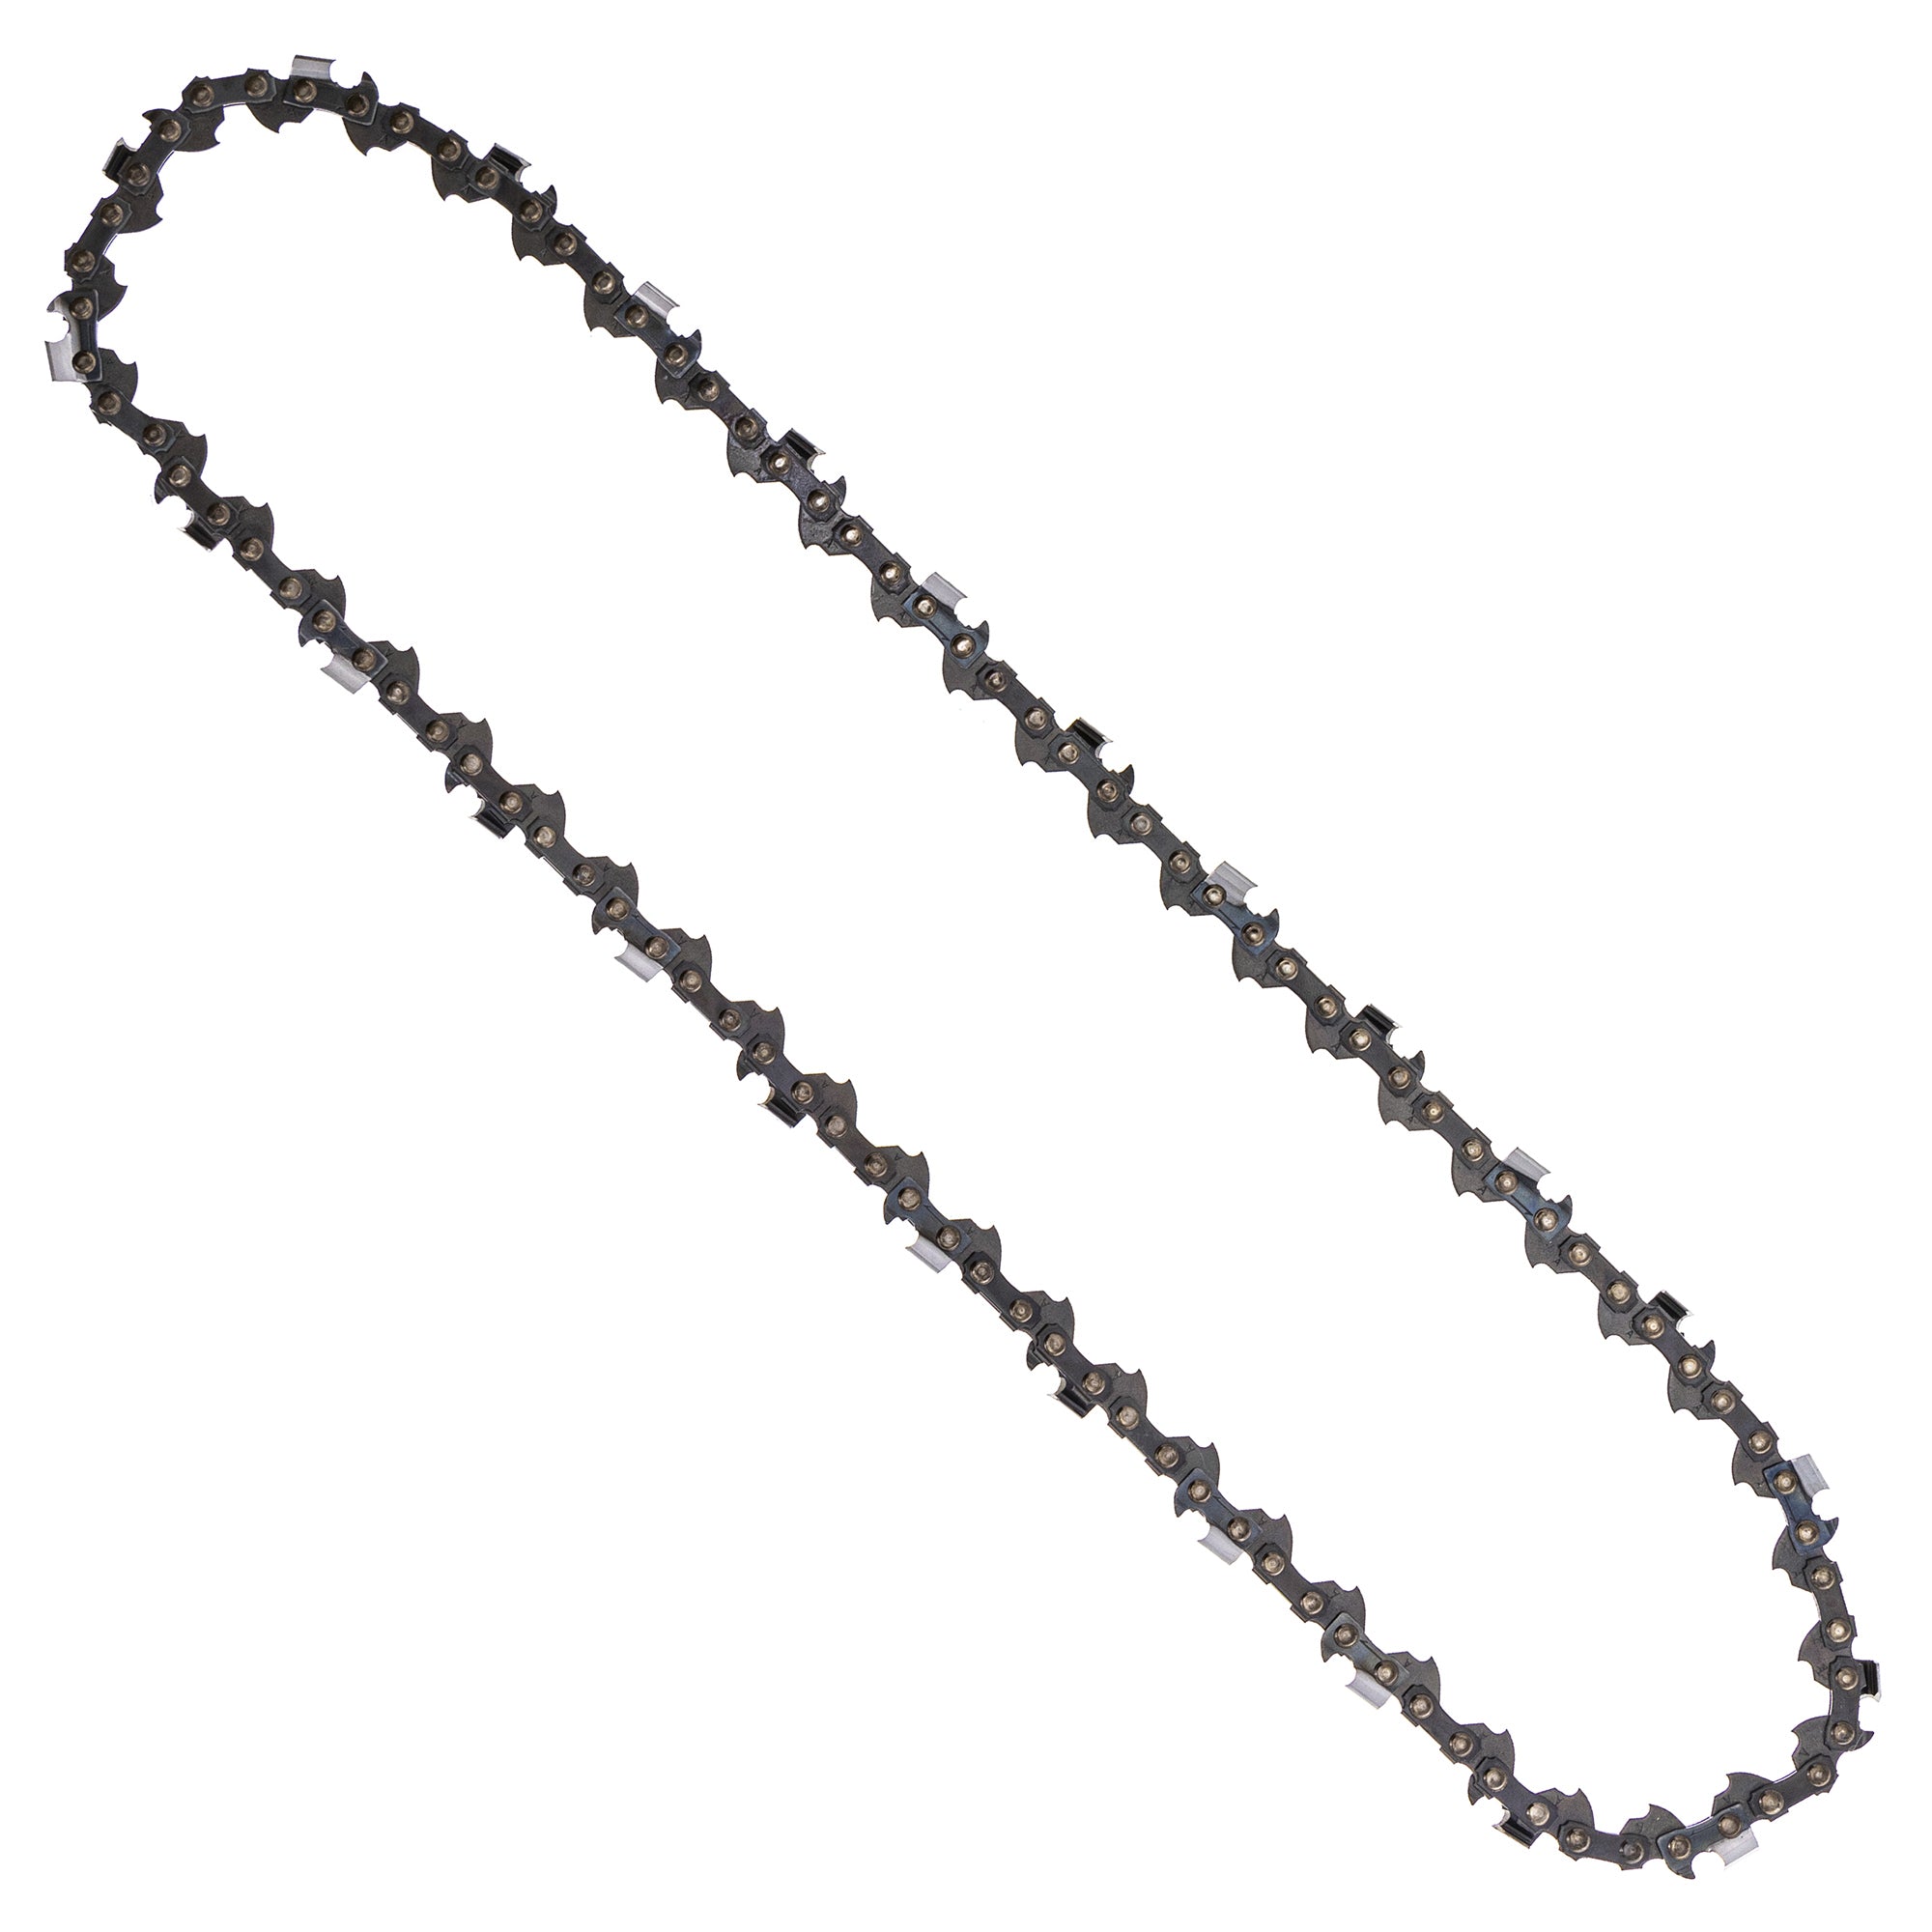 8TEN 810-CCC2234H Chain 4-Pack for zOTHER Stens Oregon Husqvarna